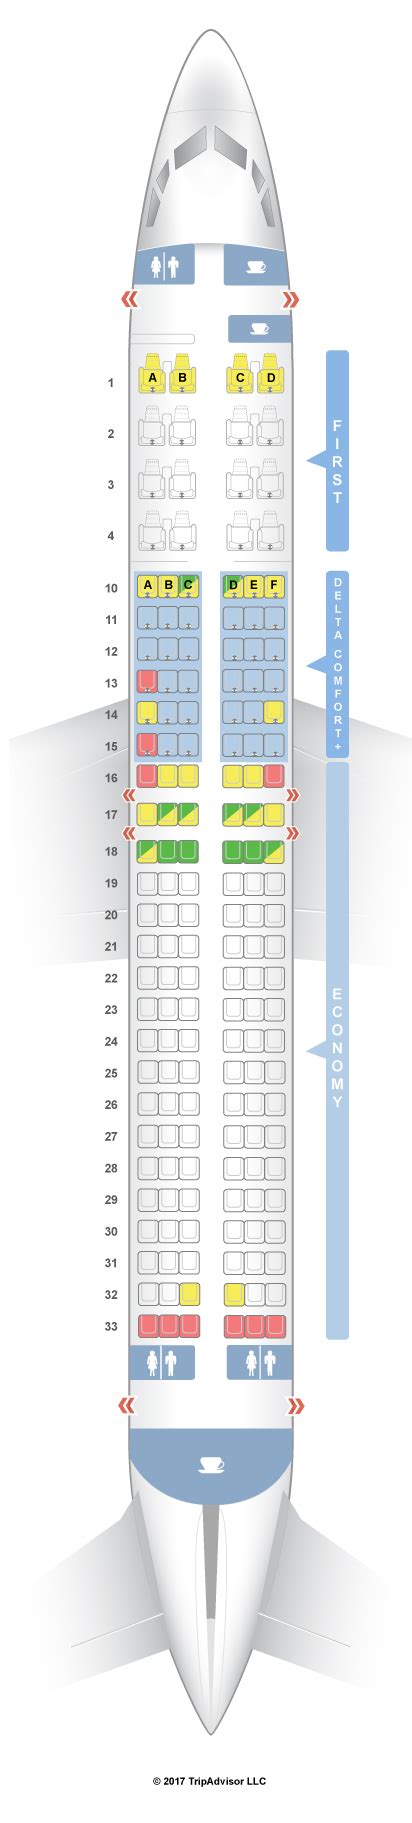 For your next TUI UK flight, use this seating chart to get the most comfortable seats, legroom, and recline on .. 